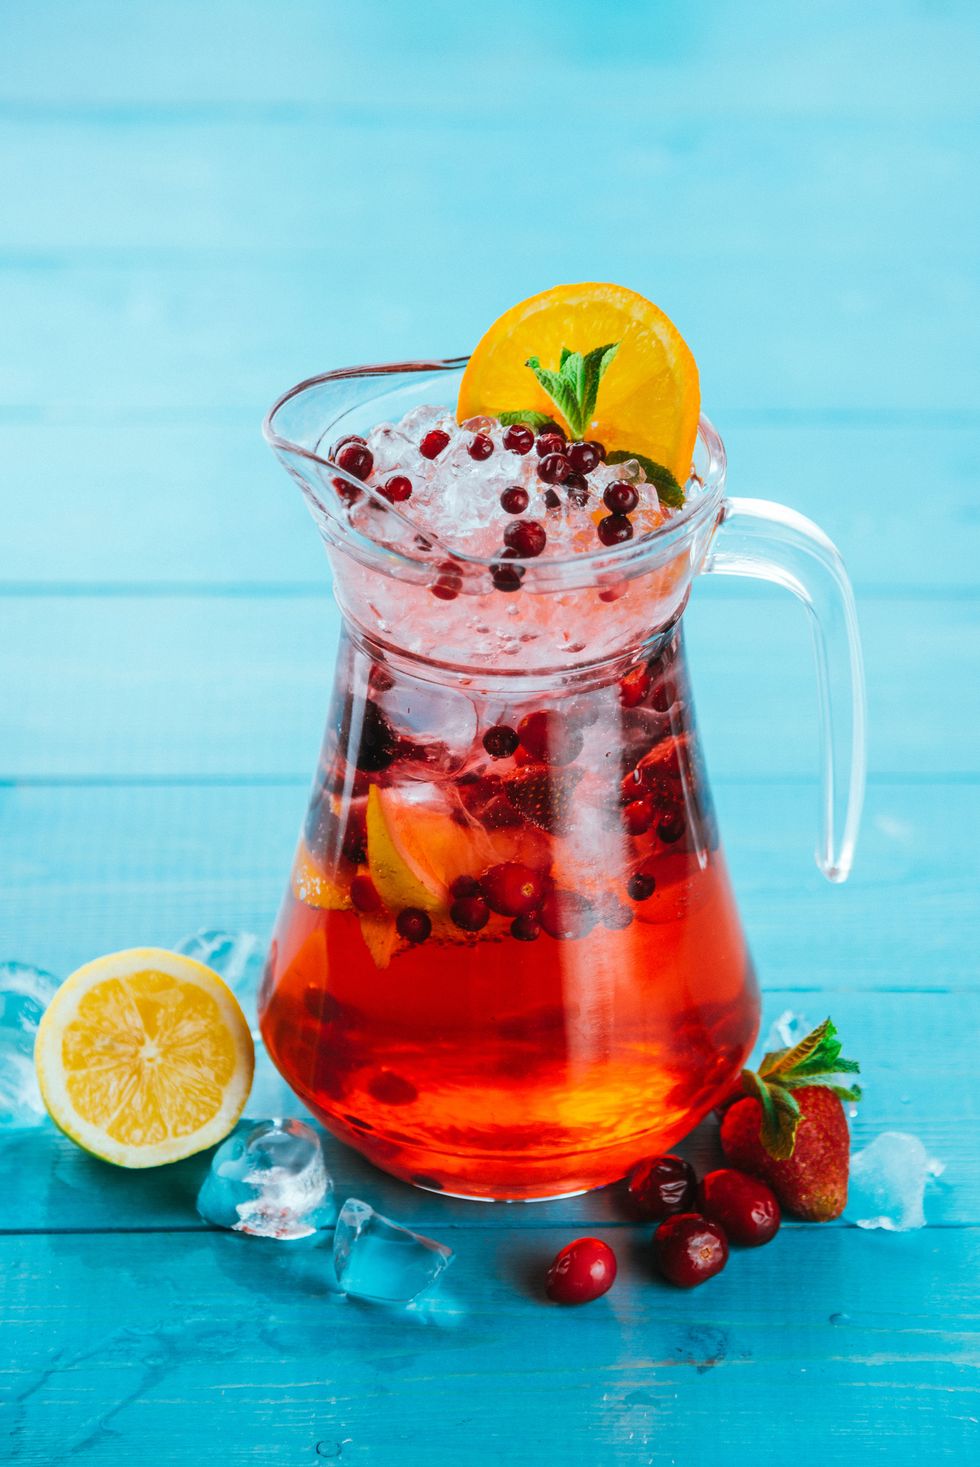 Summer Entertaining: My Go To Refreshing Drinks for Beverage